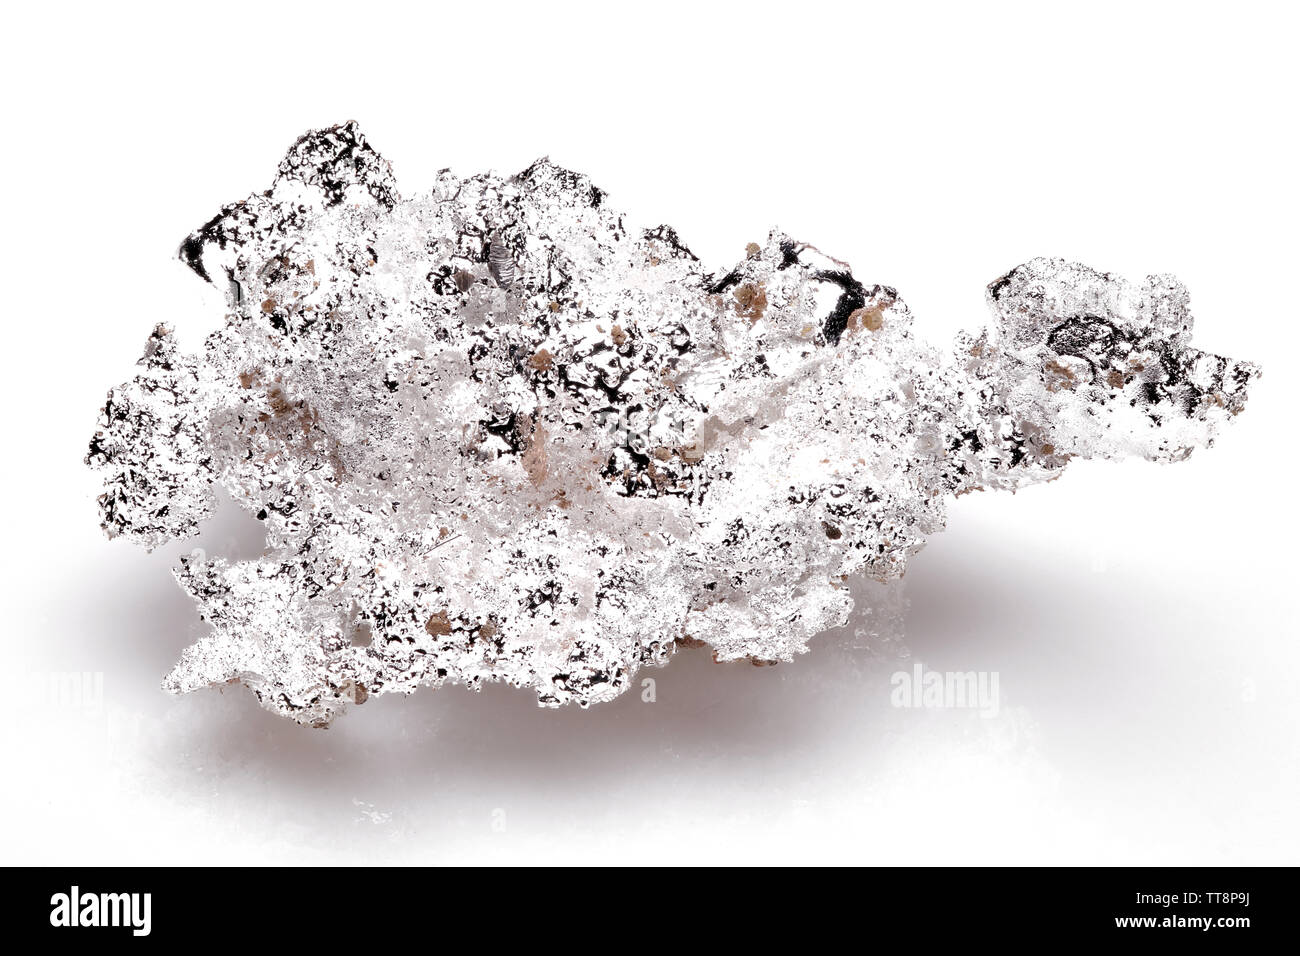 crystalline silver nugget from Reno, Nevada isolated on white background Stock Photo